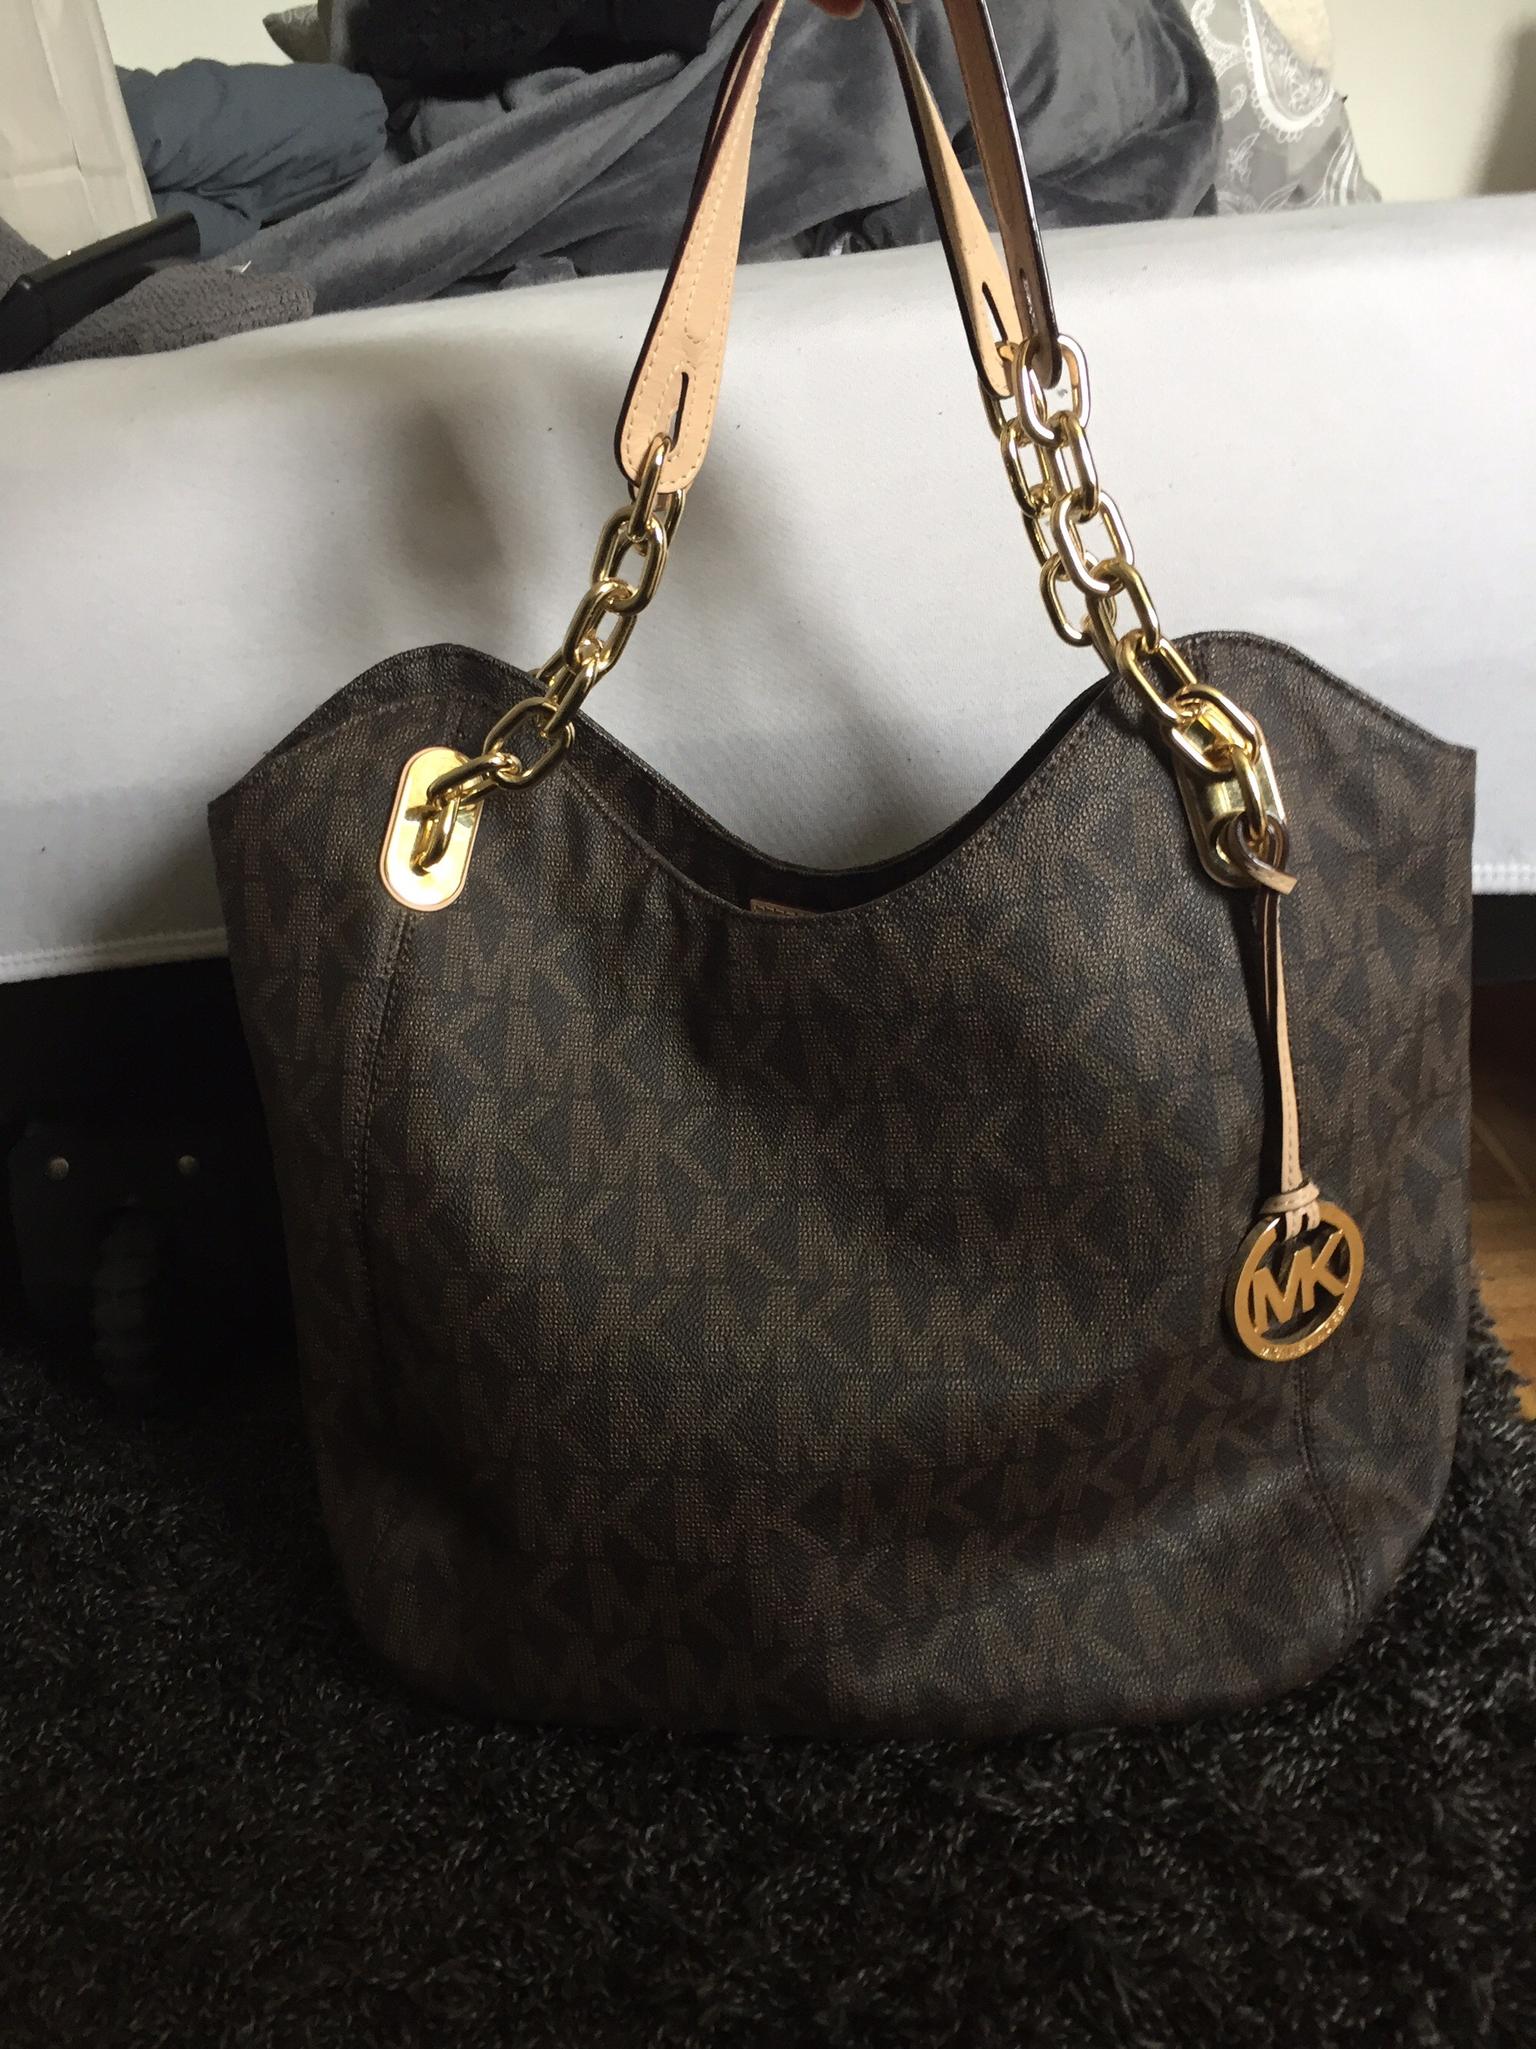 michael kors lilly large